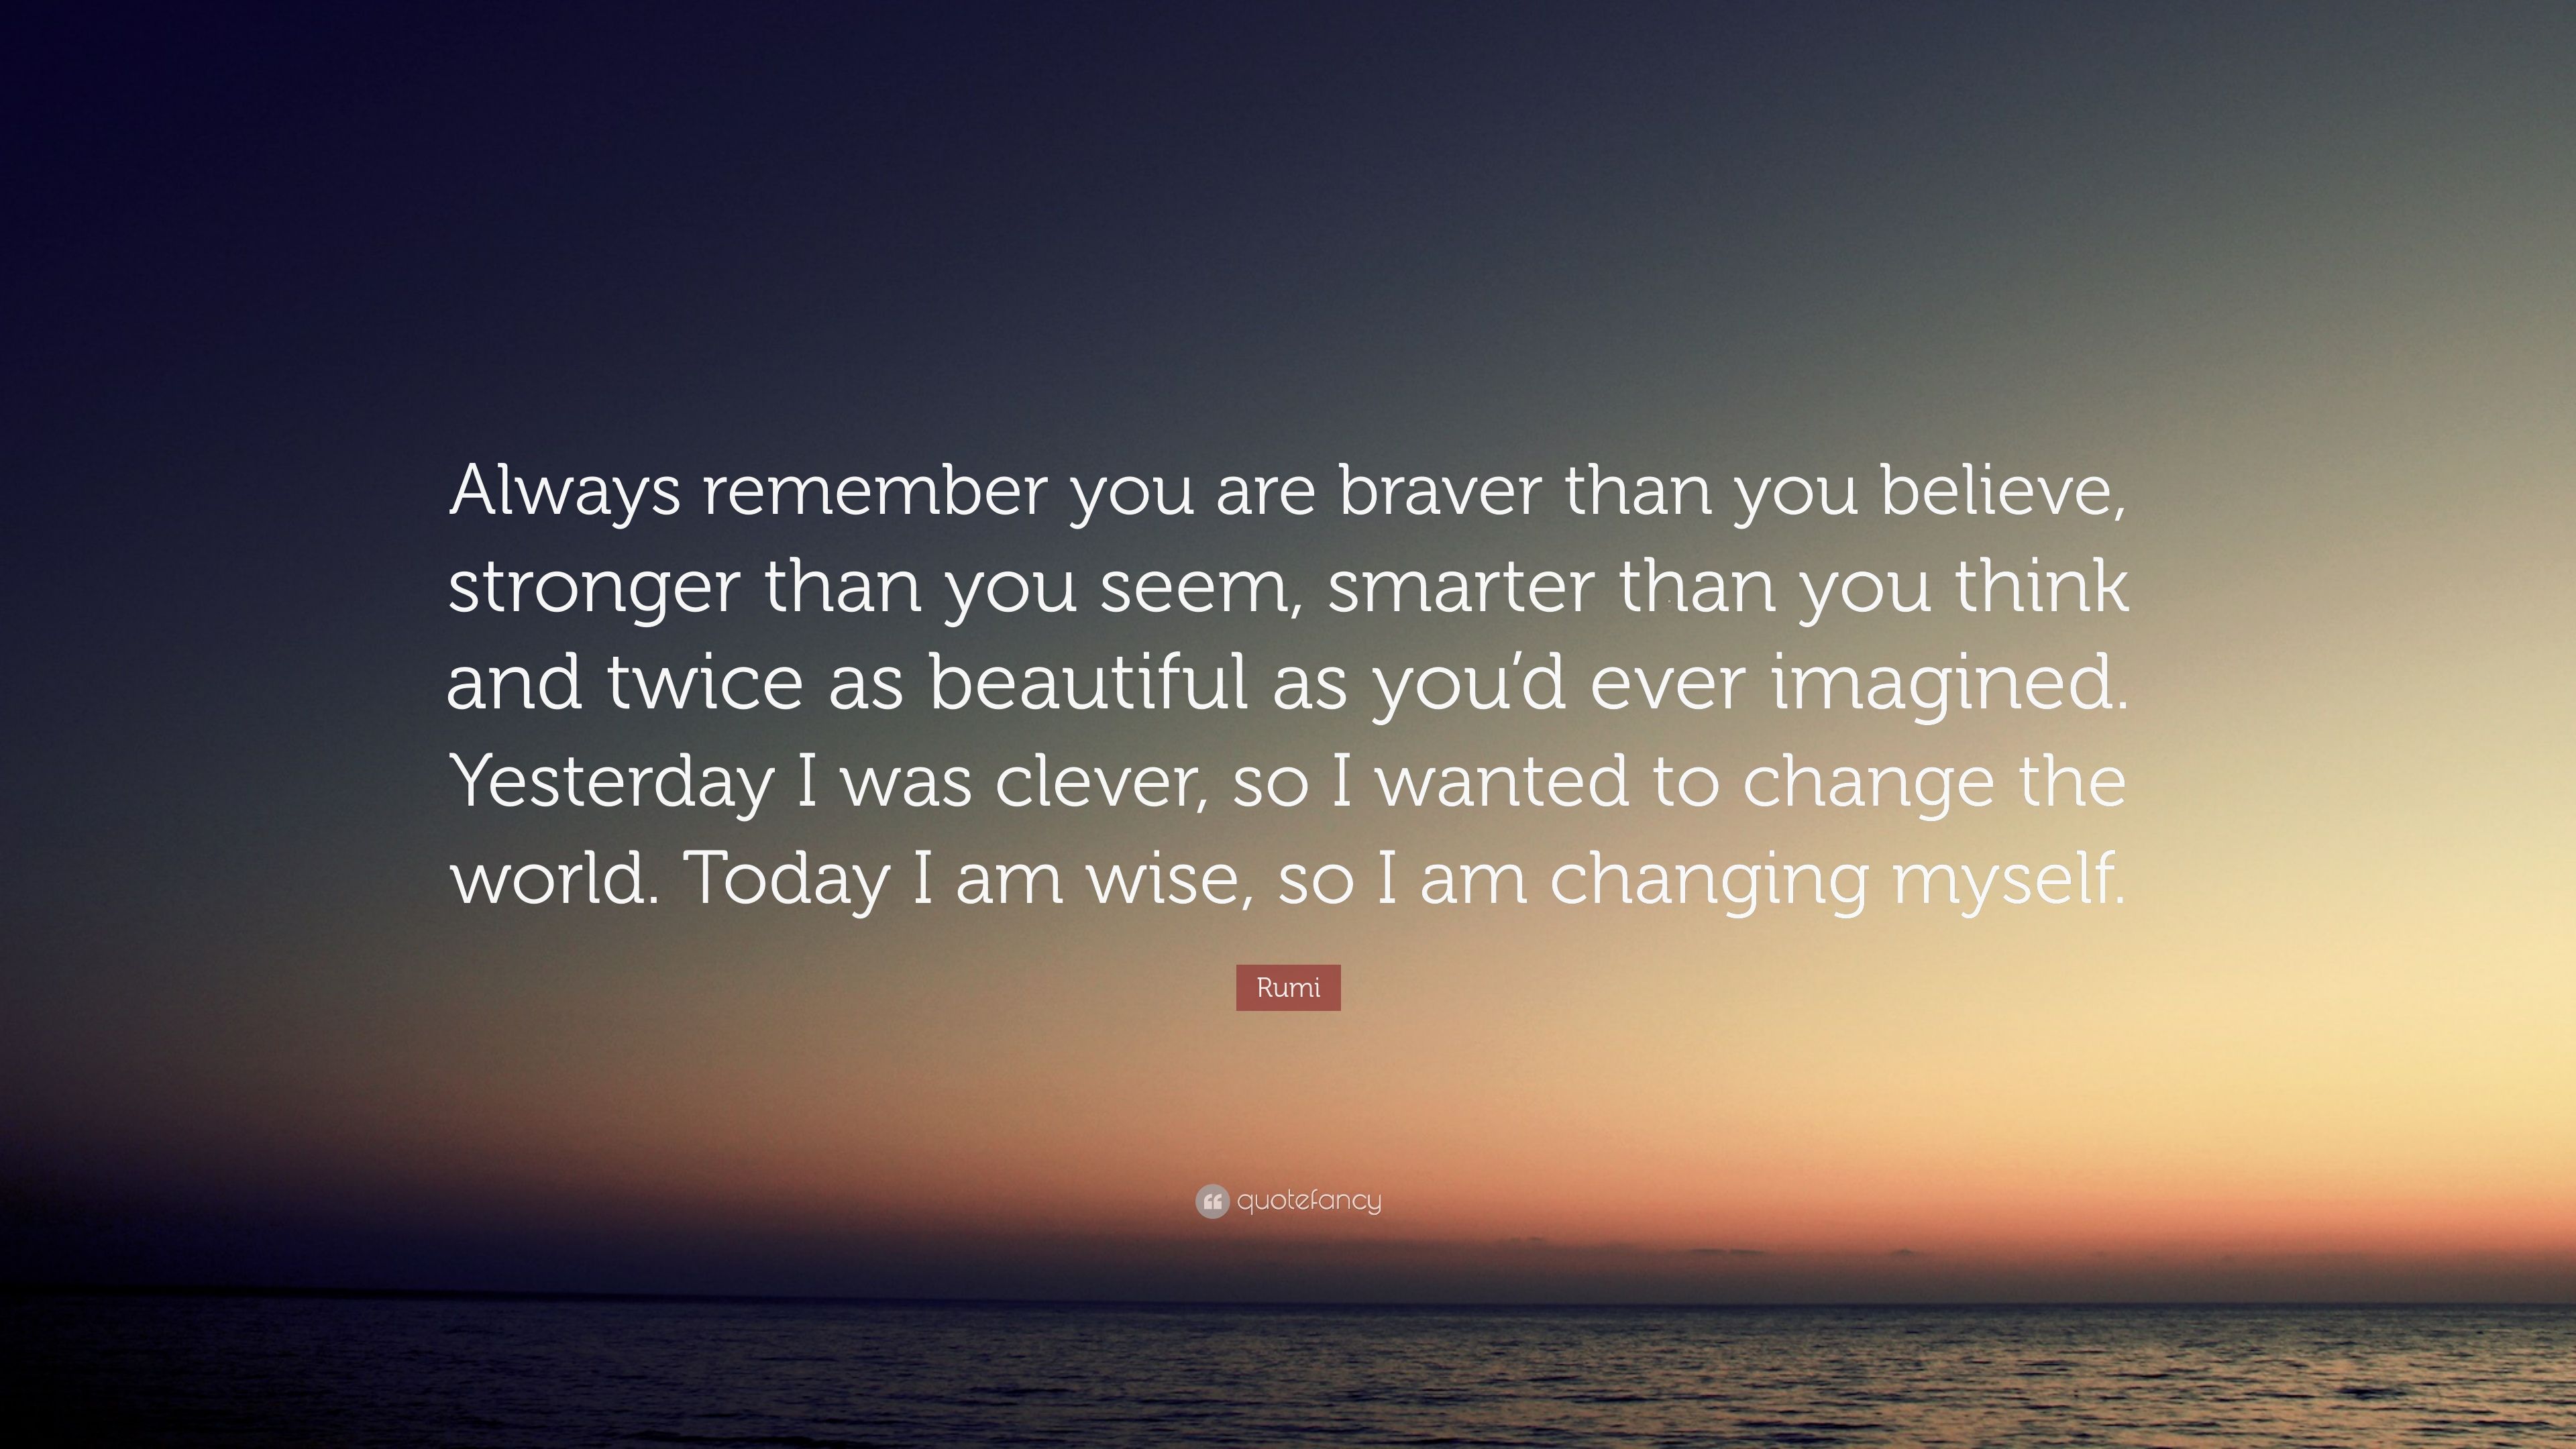 Rumi Quote: “Always remember you are .quotefancy.com